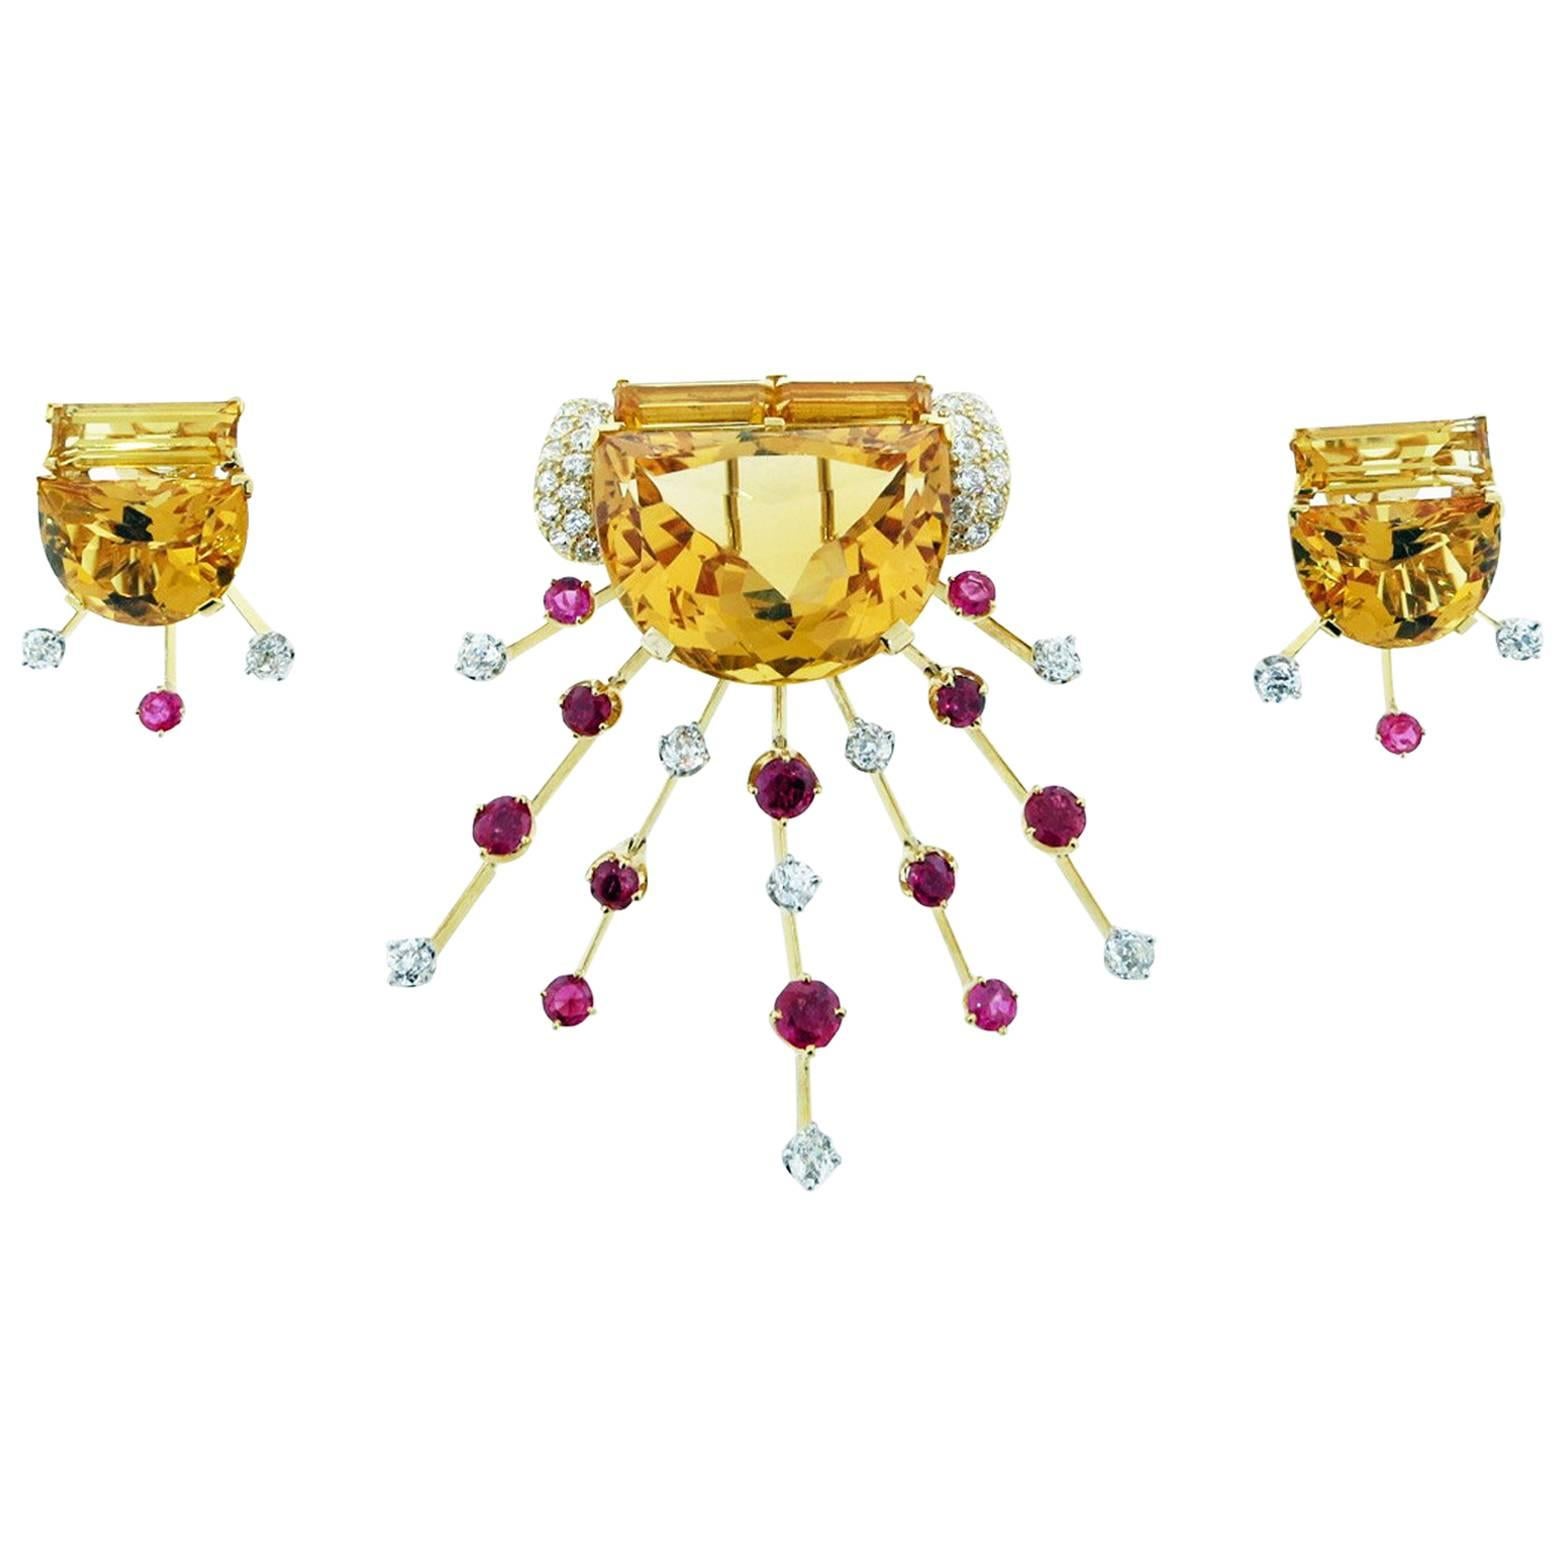 Fantastic 1950s Citrine Ruby and Diamond Brooch and Earring Set For Sale